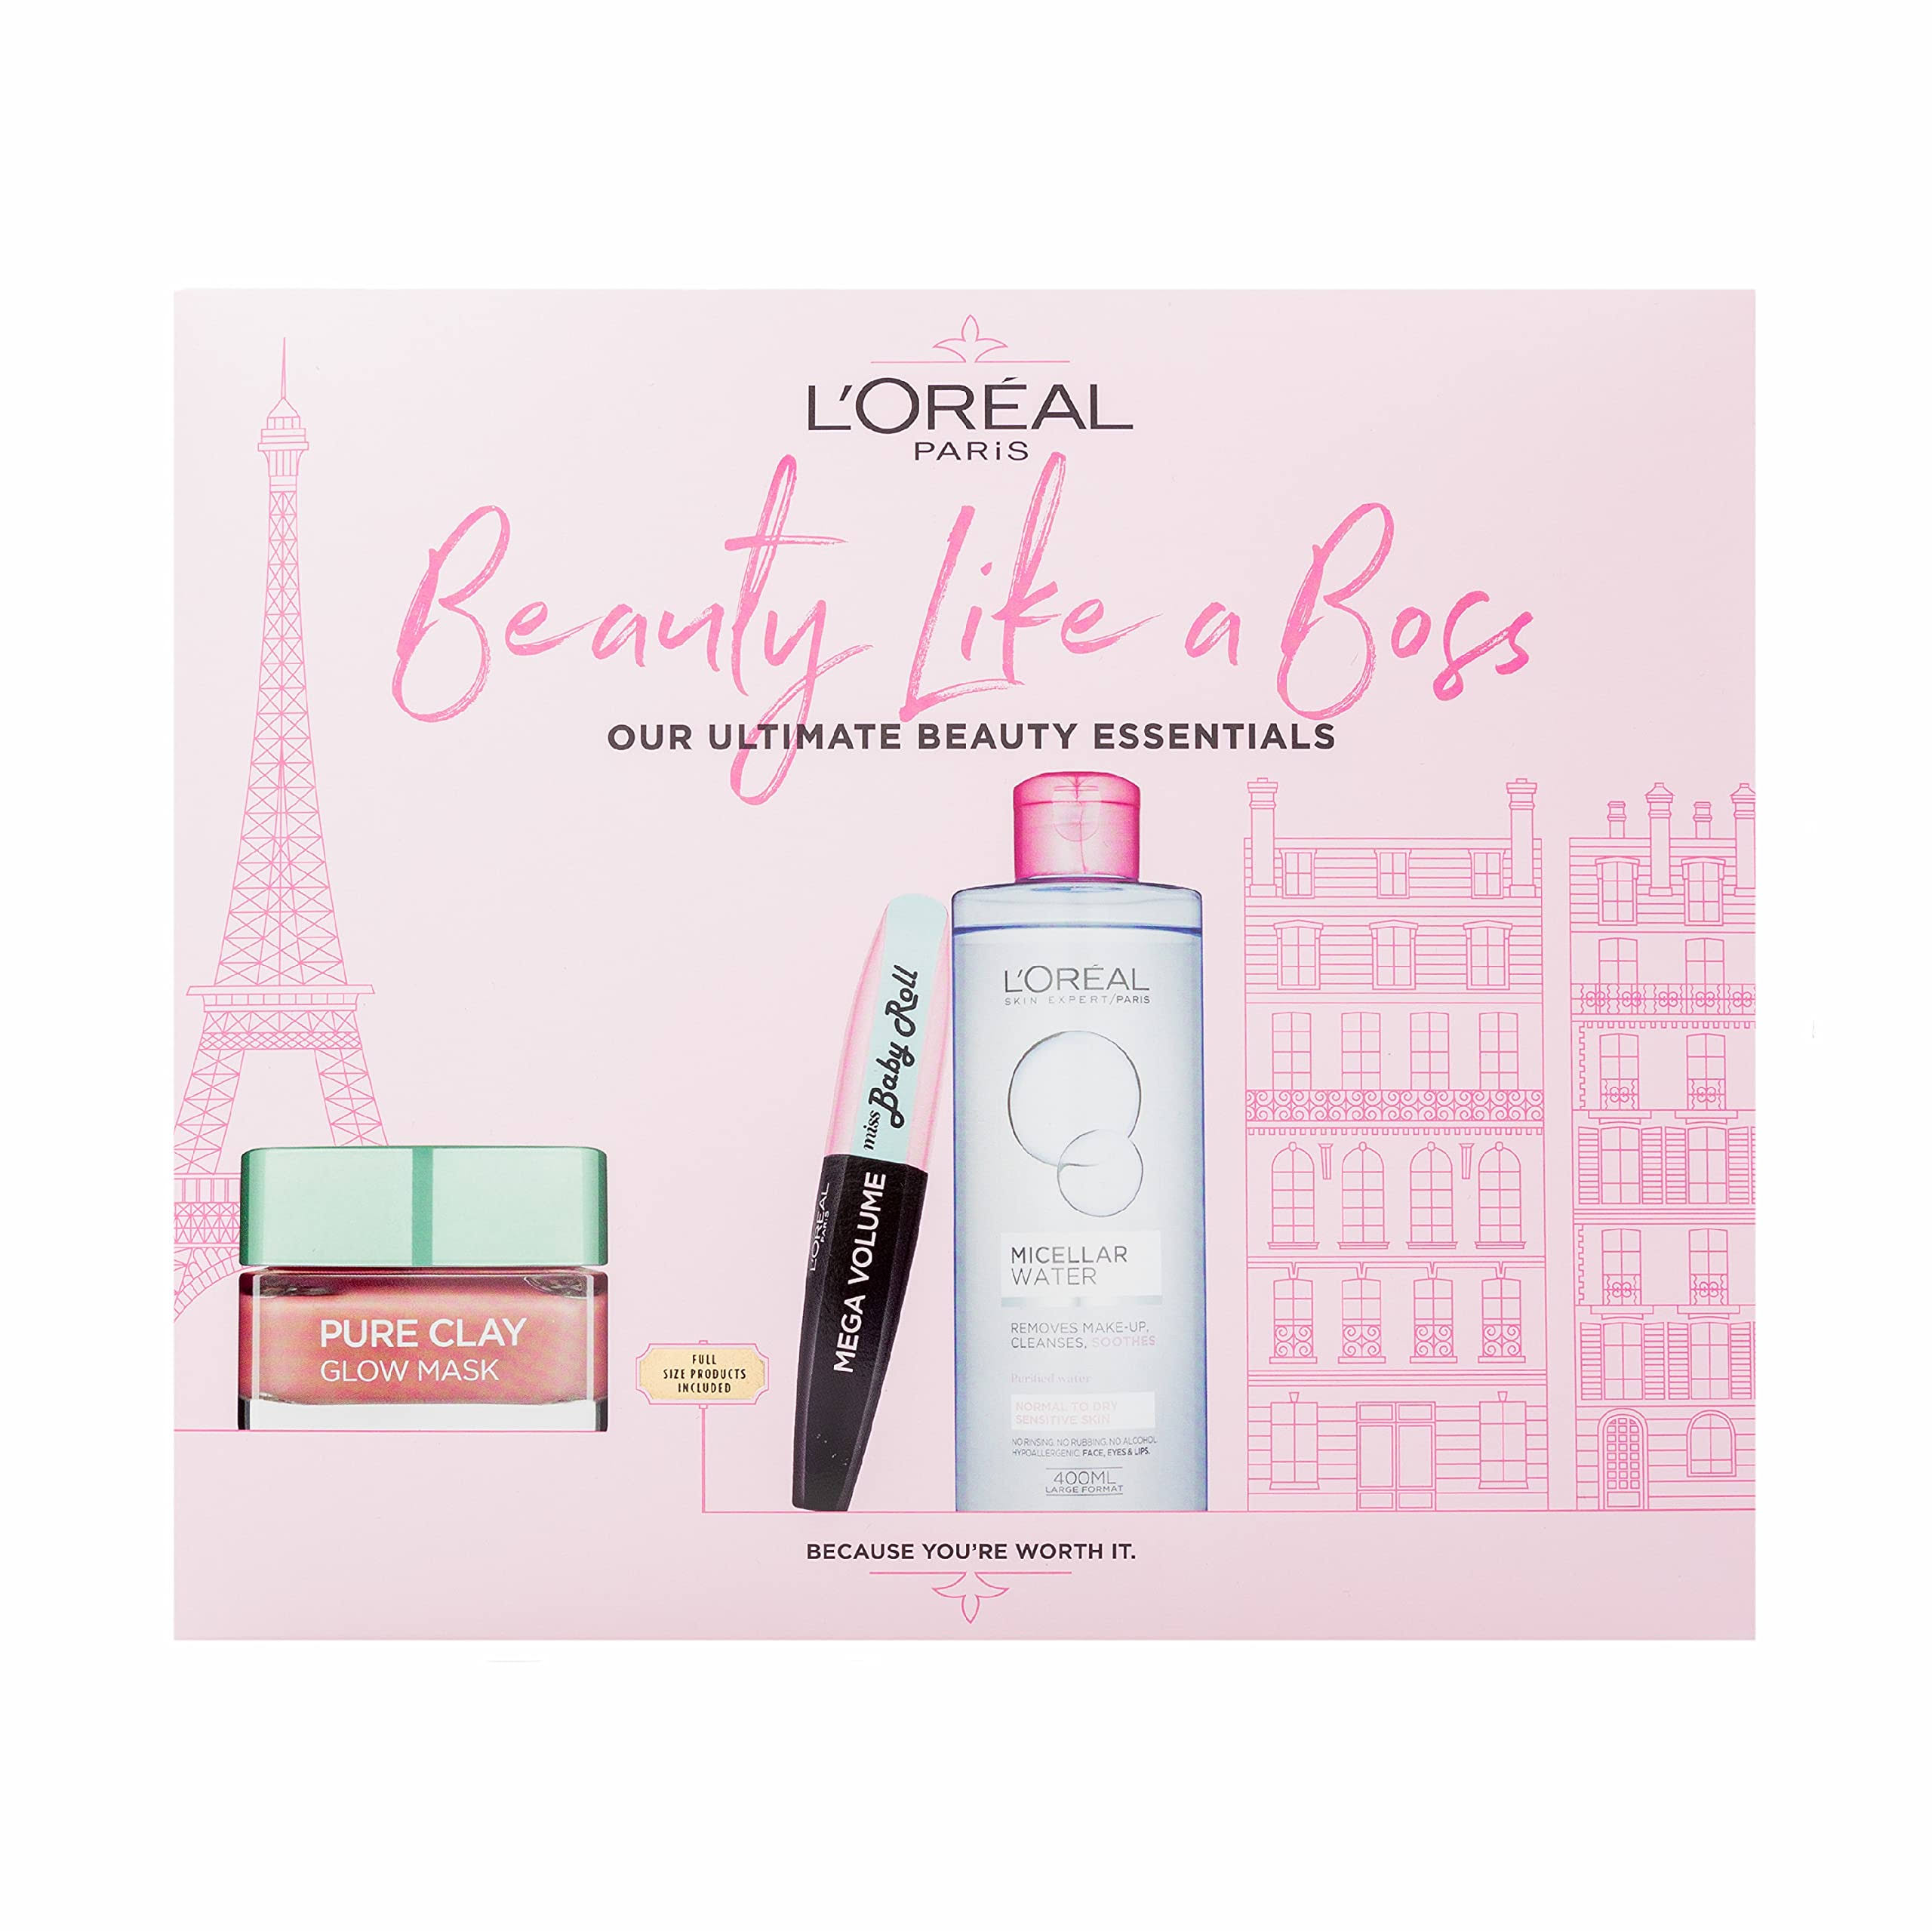 L'Oreal Paris Beauty Like A Boss Micellar, Face Mask & Mascara Gift Set for Her